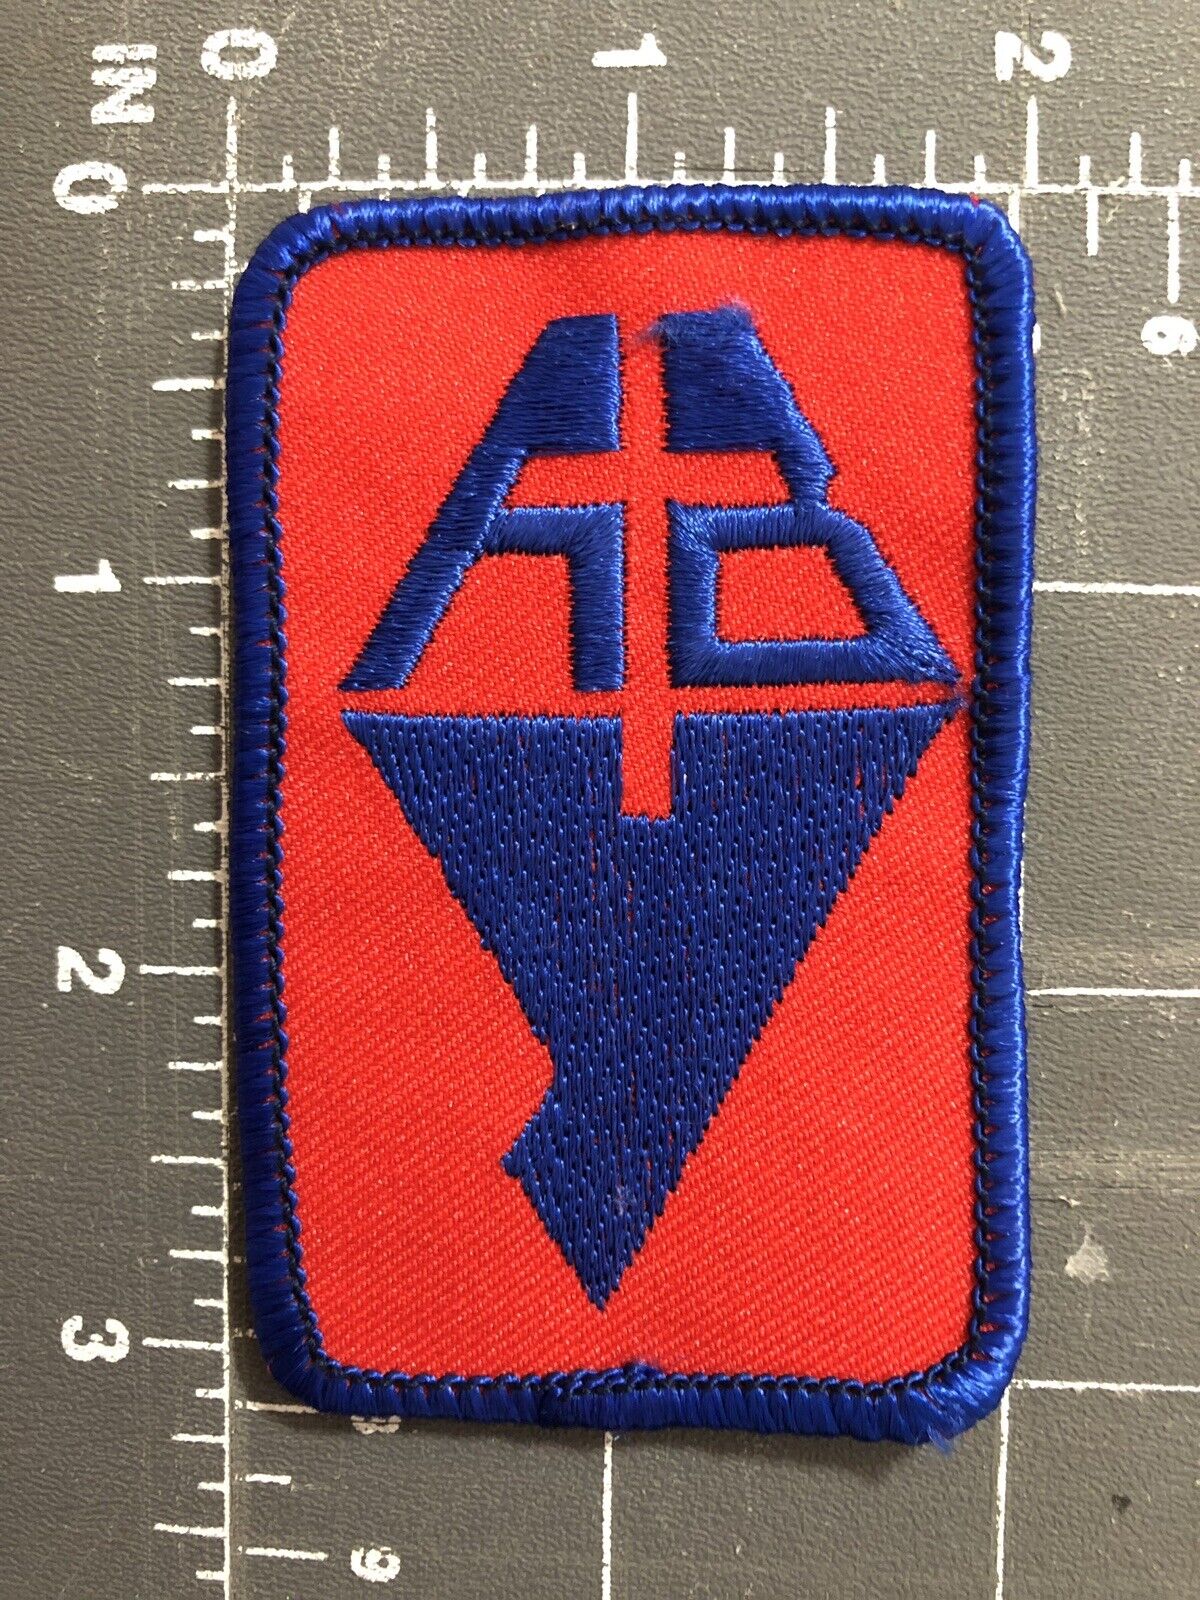 Vintage ABY A.B.Y. Logo Patch American Baptist Youth Religion Church Christian